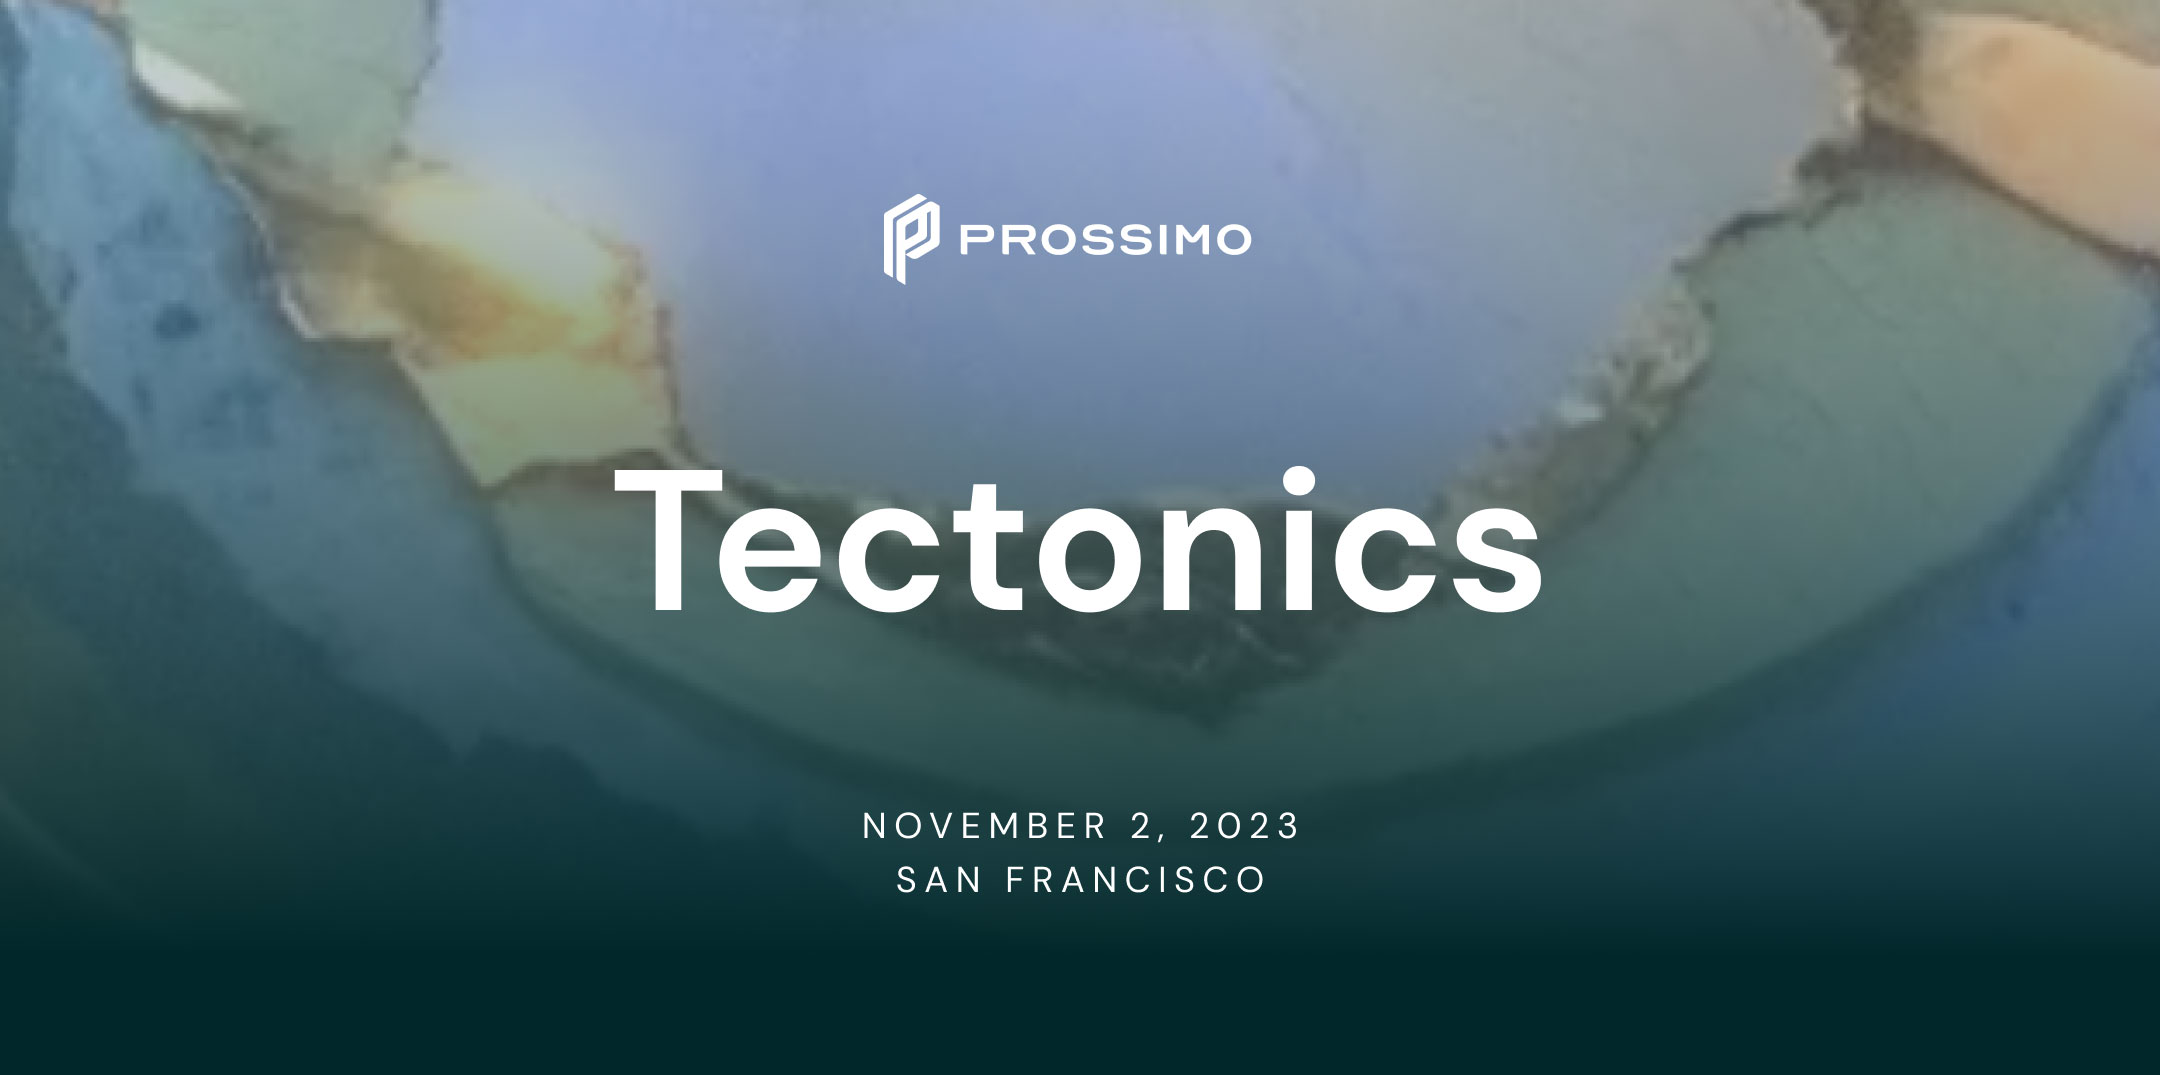 In November of 2023, ISRG held an event in San Francisco called Tectonics. Our goal was to discuss solutions for moving forward with memory safety for